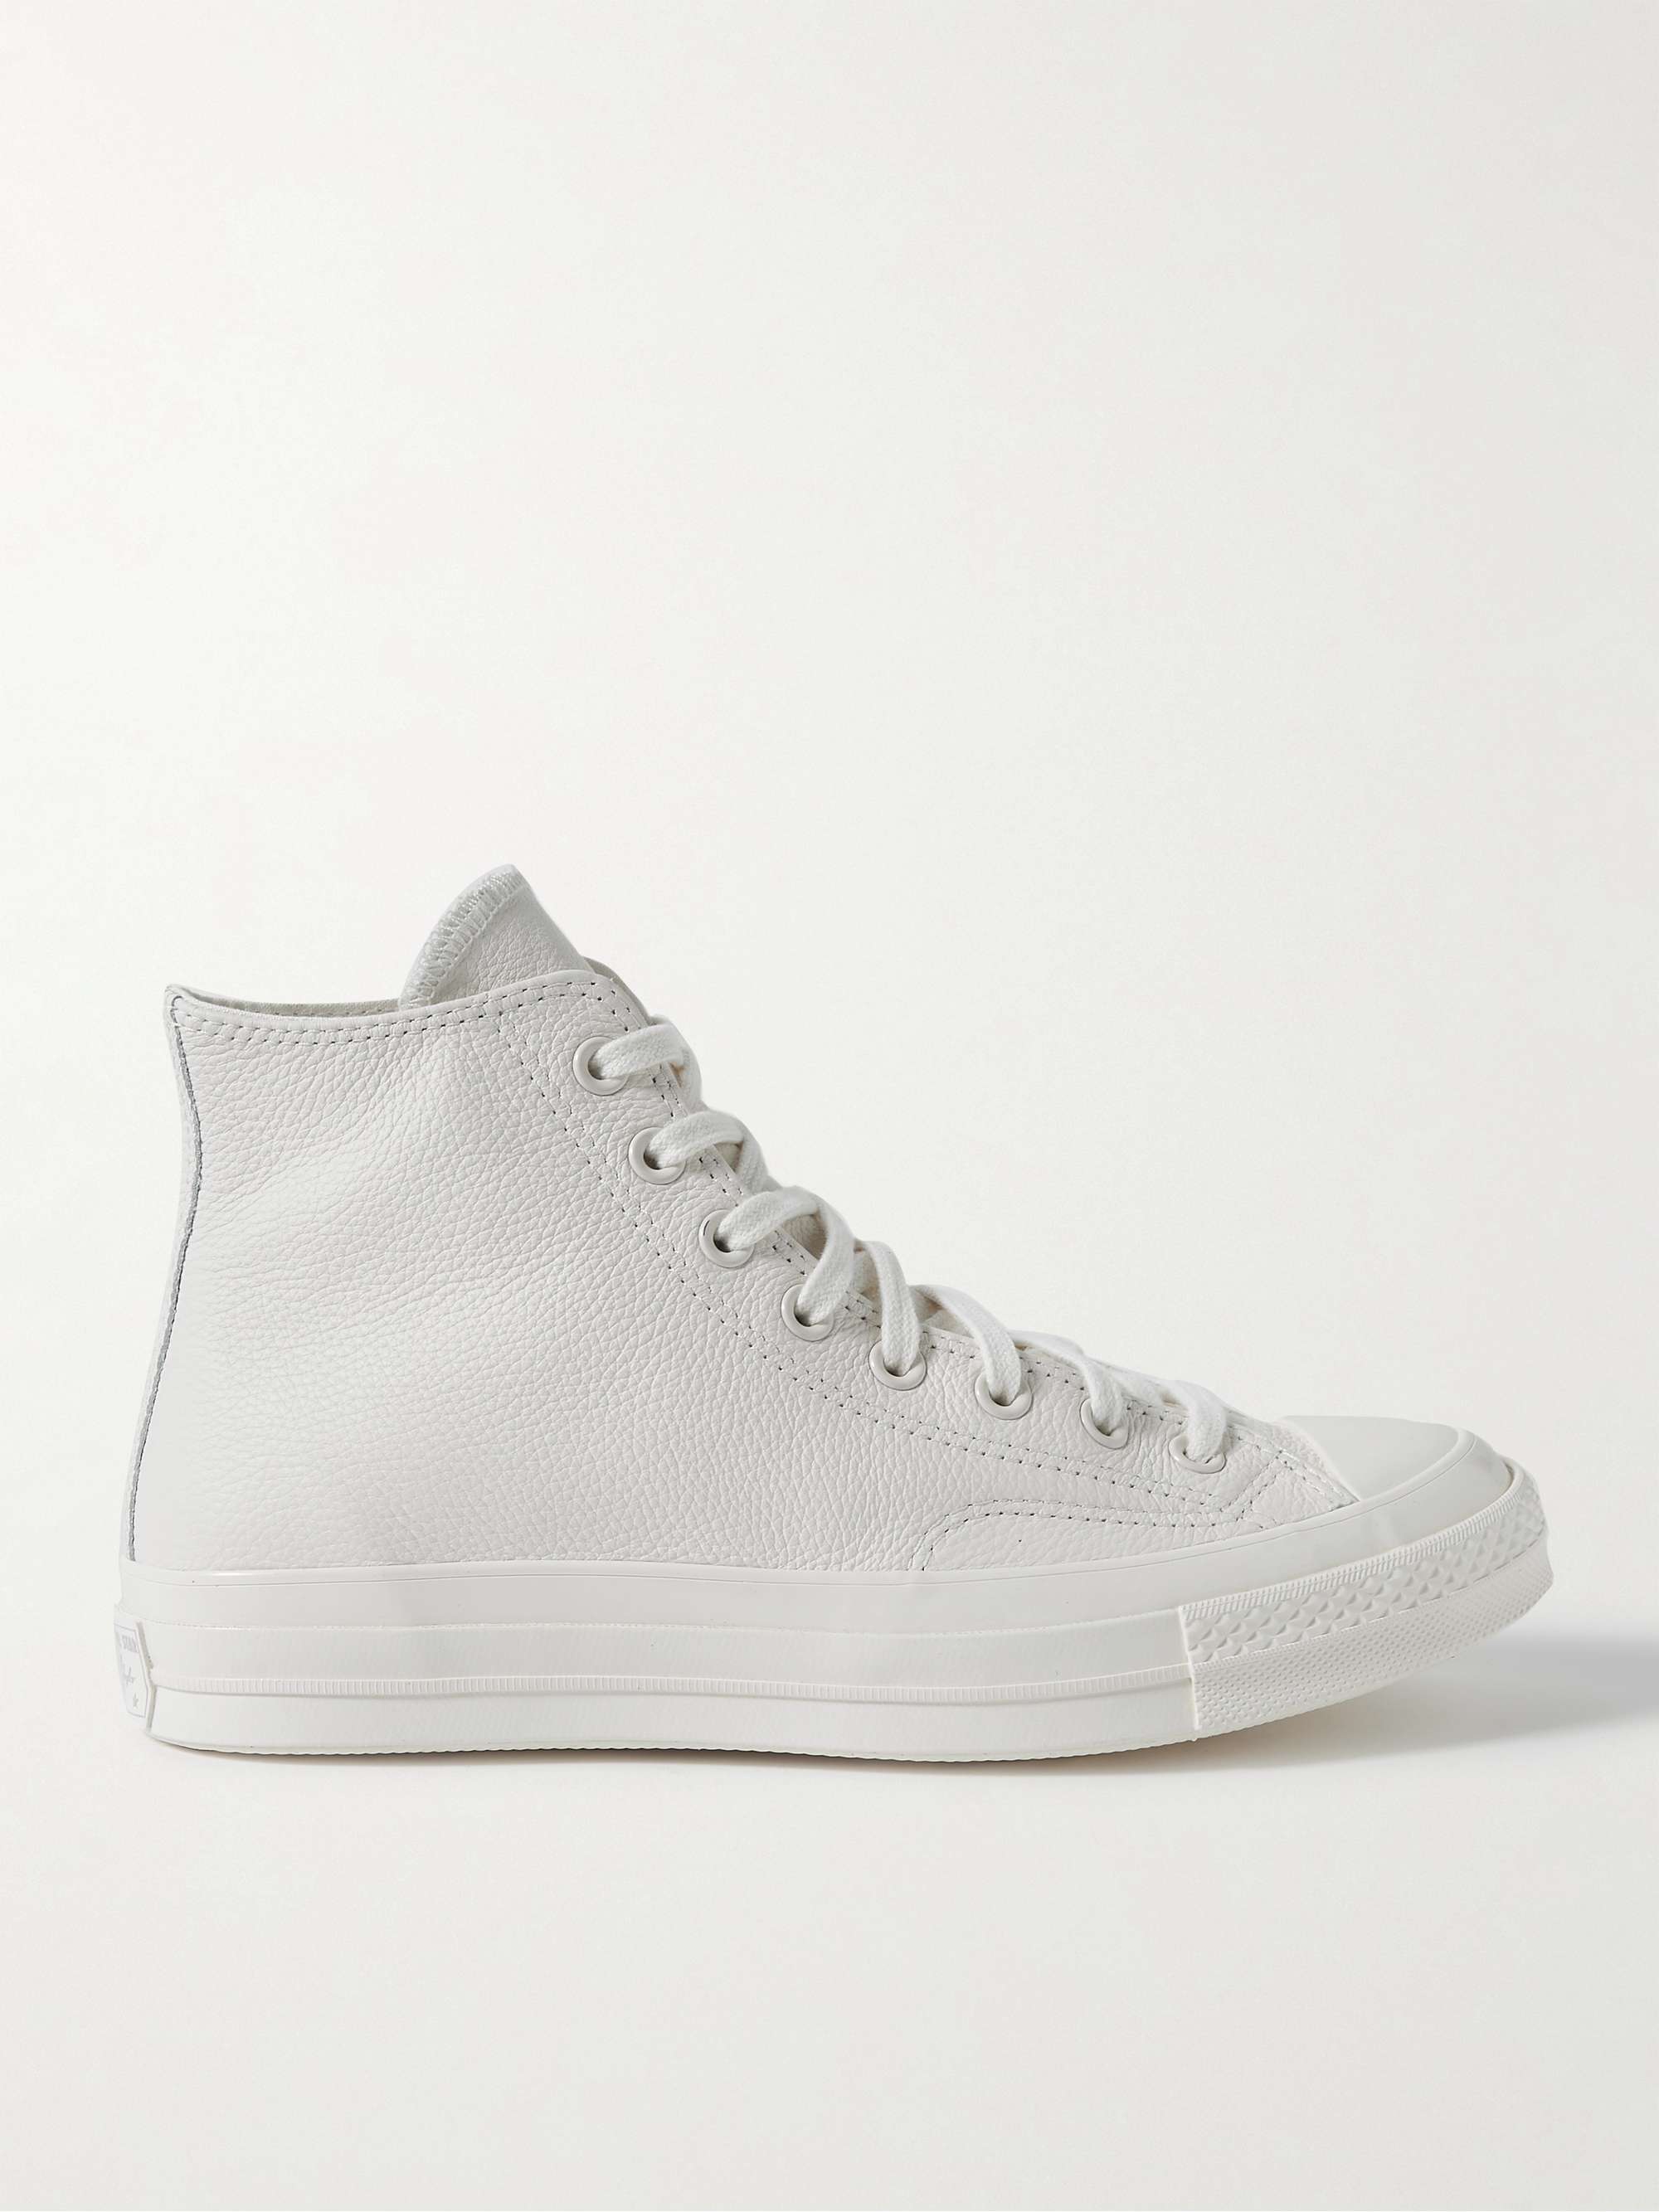 CONVERSE Chuck 70 Full-Grain Leather High-Top Sneakers